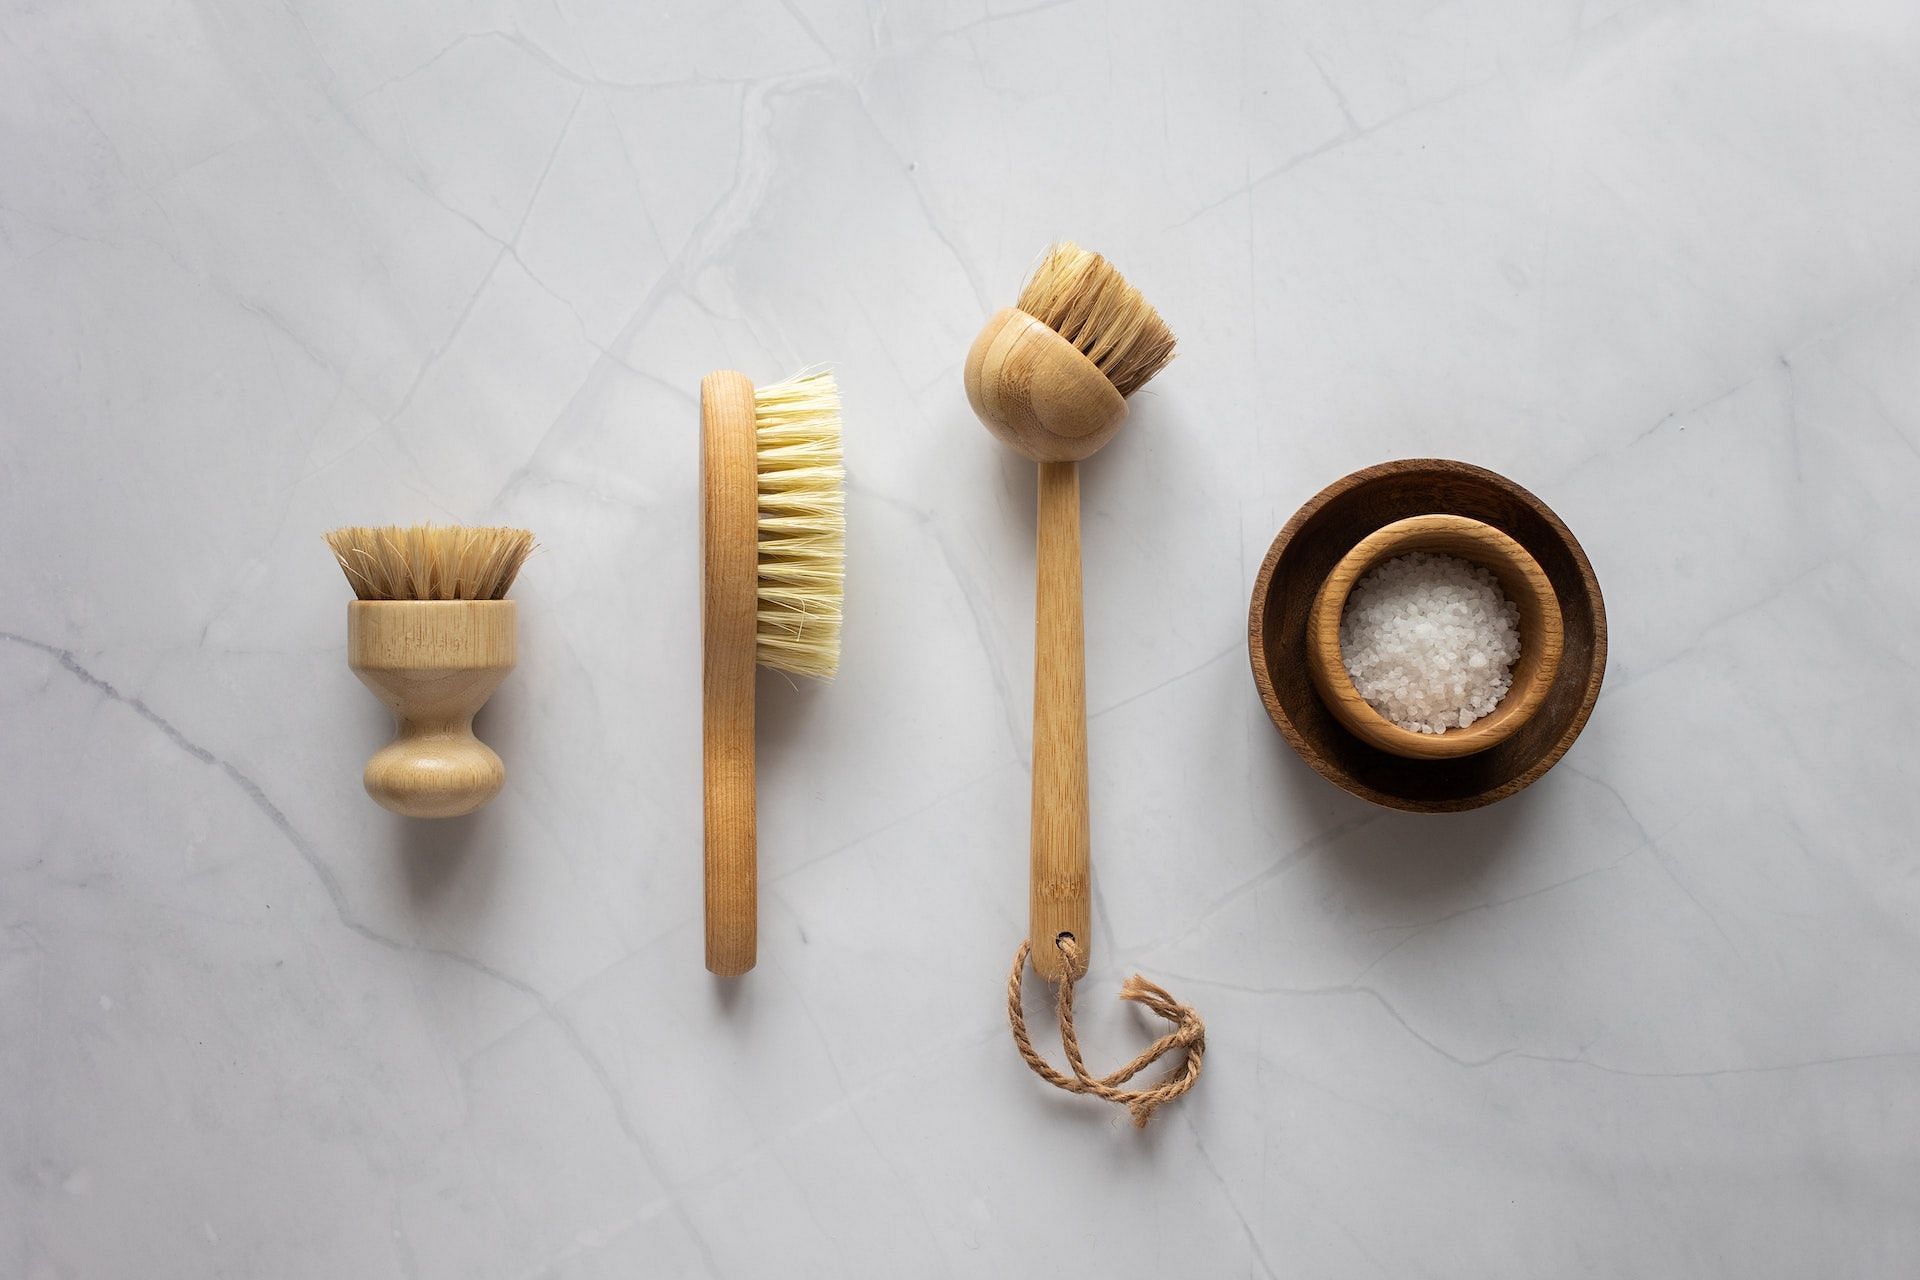 Dry brushing offers relaxation. (Photo via Pexels/Monstera)